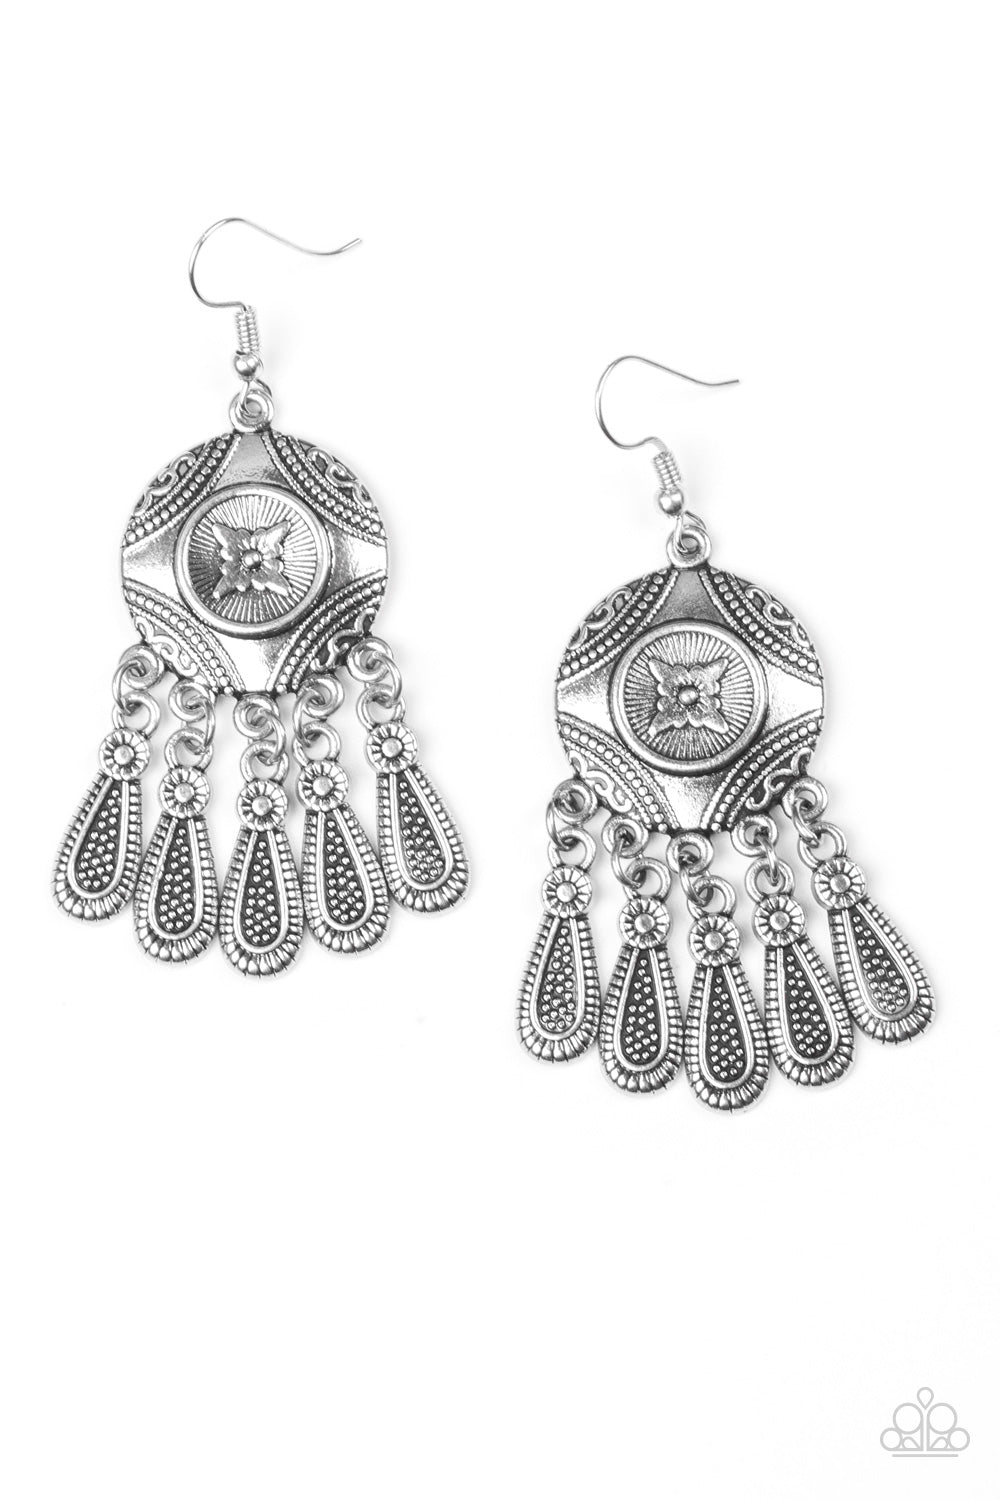 Paparazzi Whimsical Wind Chime Silver Earrings